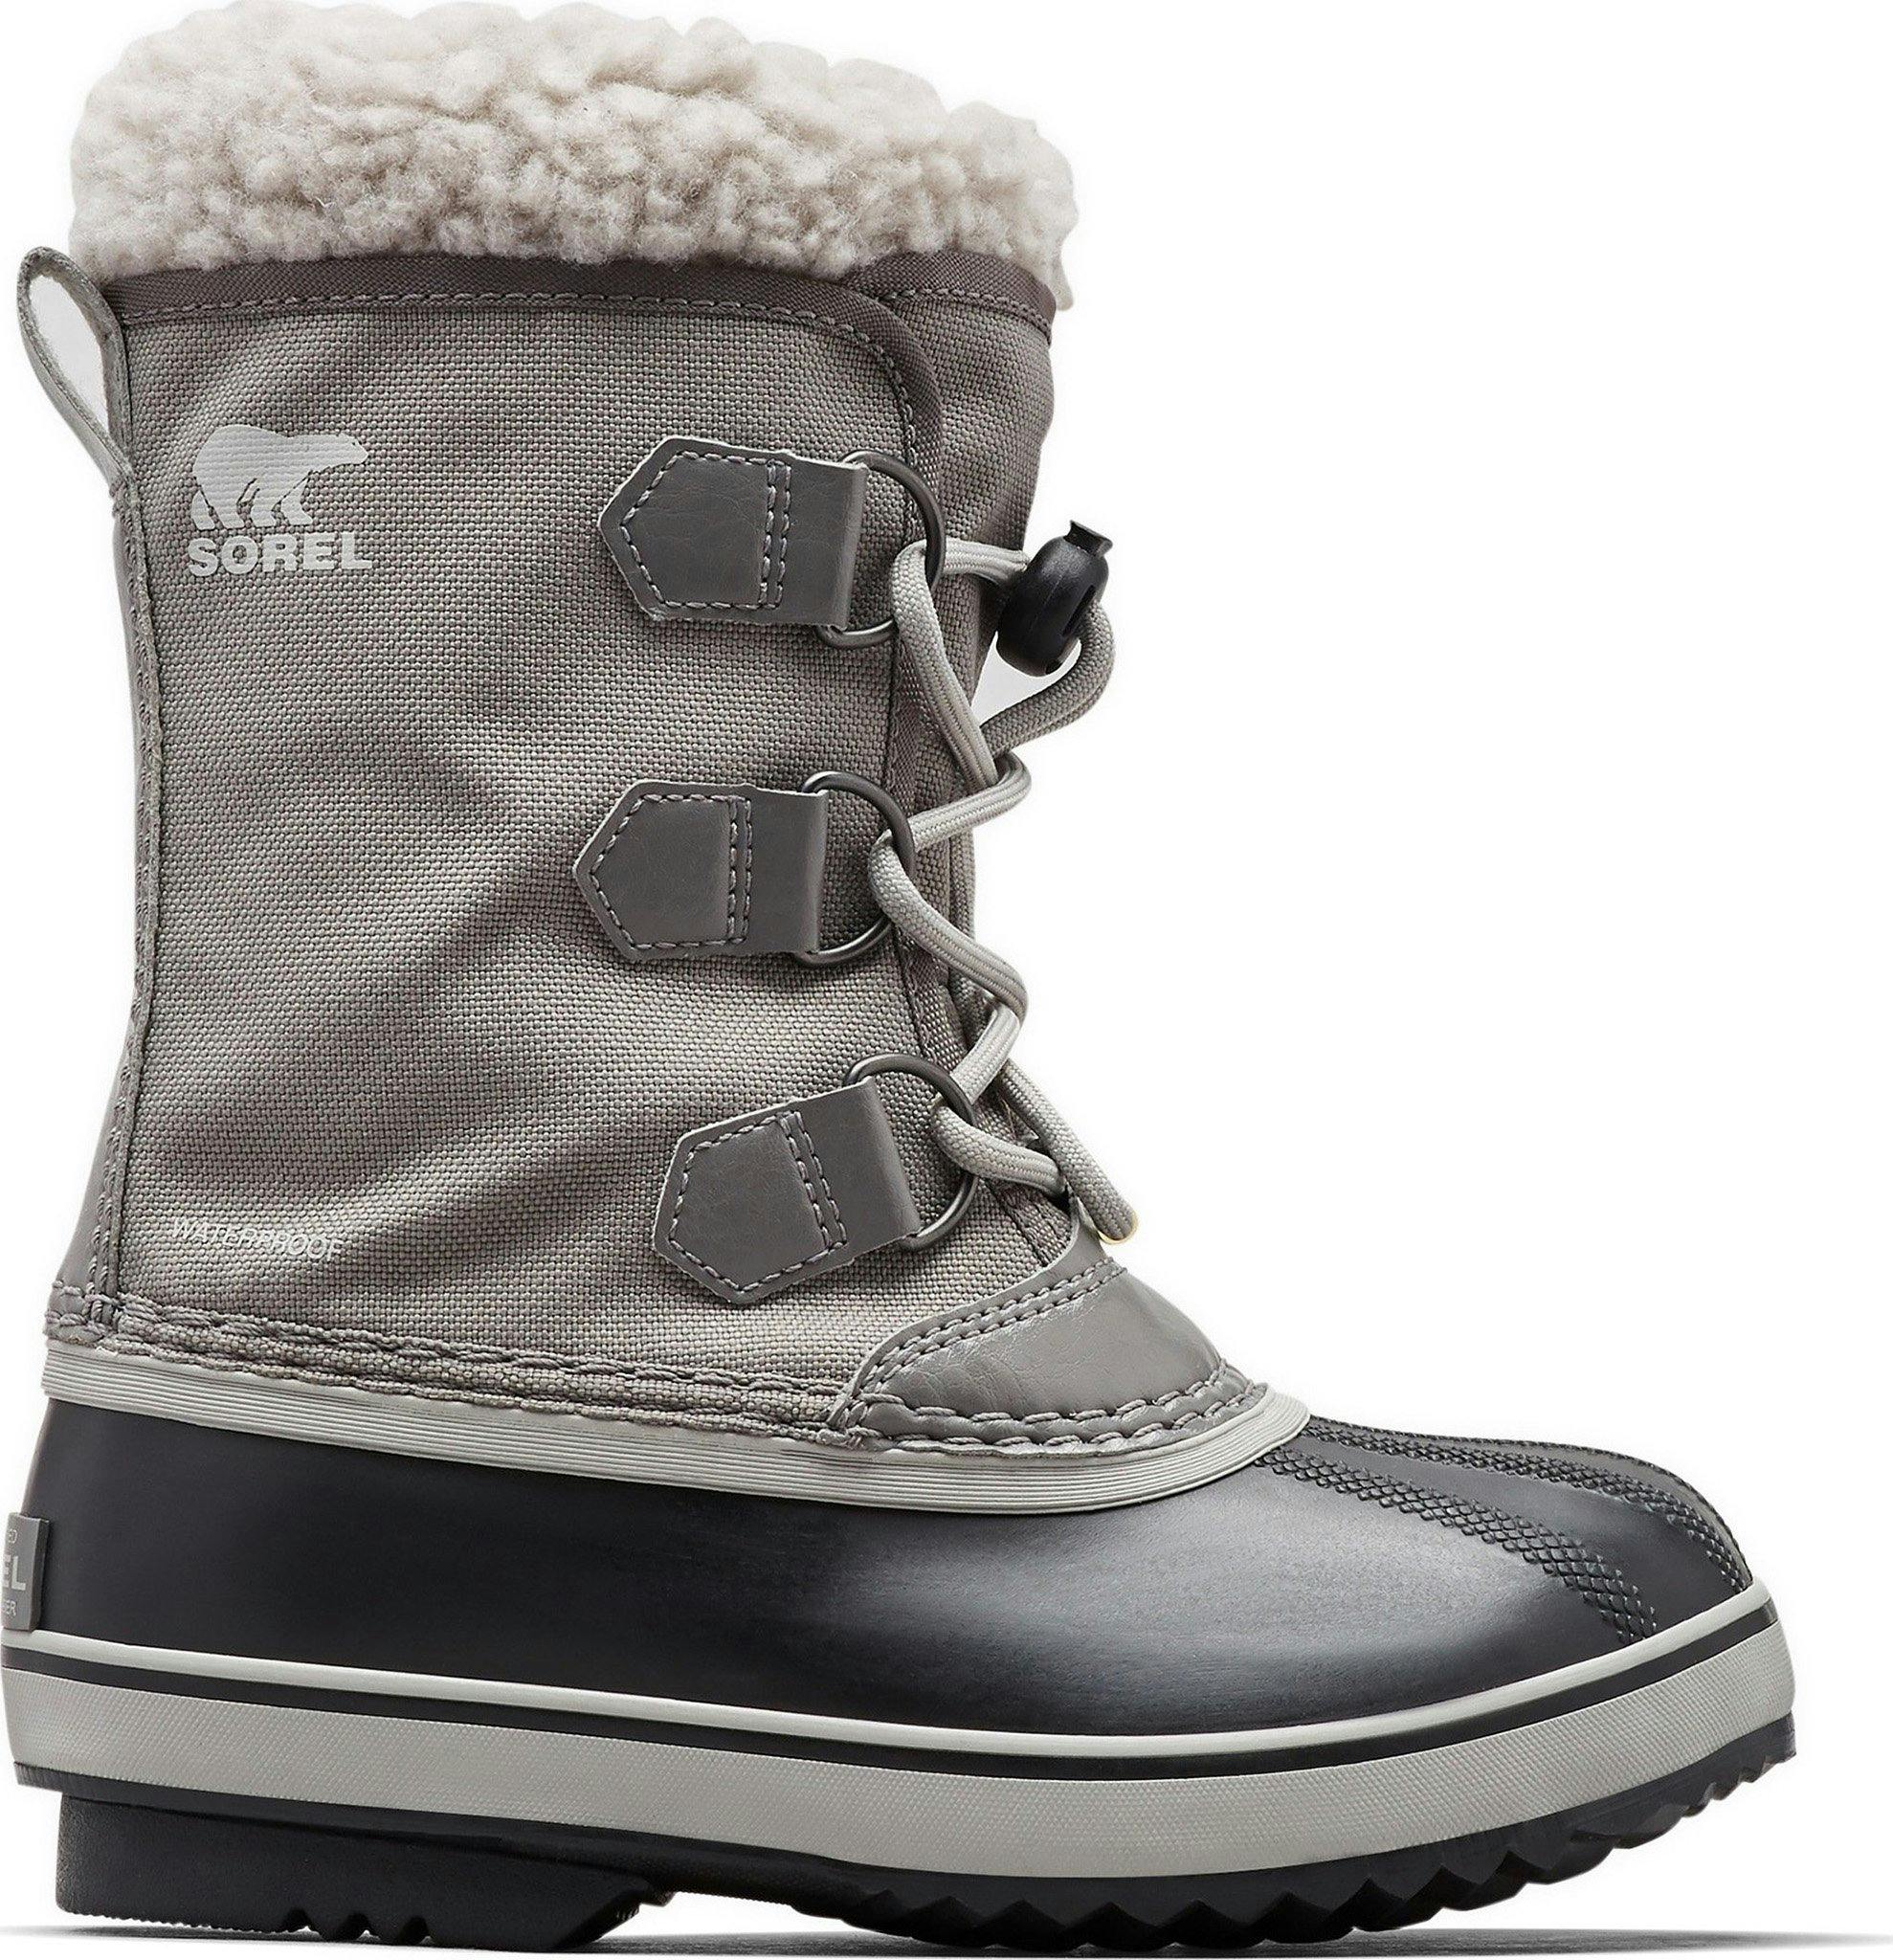 Product image for Yoot Pac Nylon Boots - Big Kids